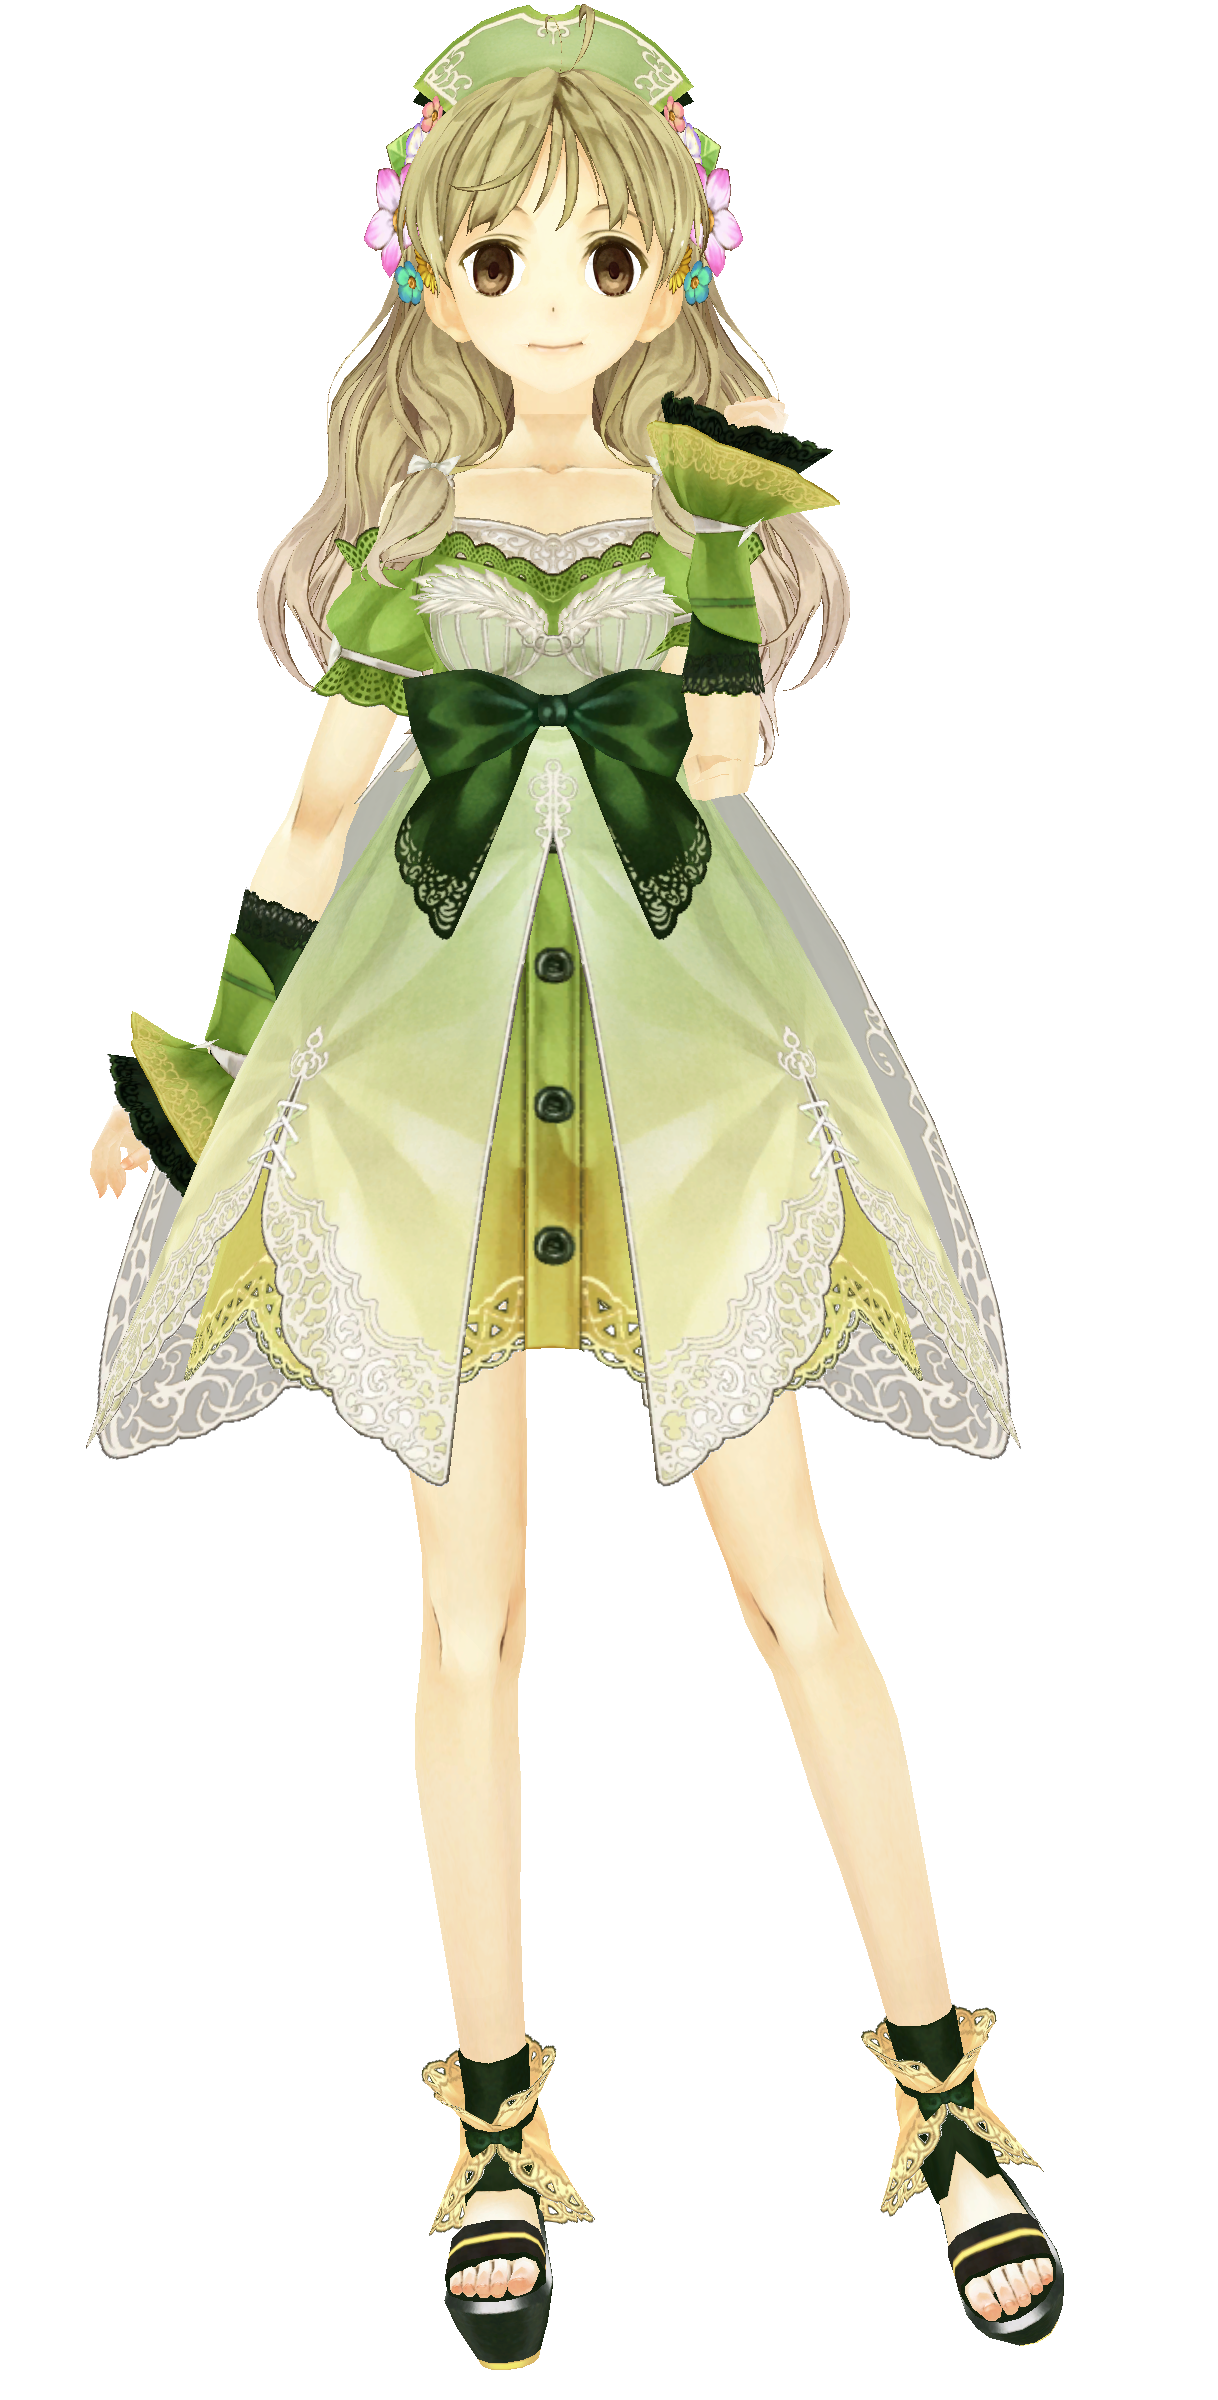 HQ Atelier Ayesha Wallpapers | File 2092.83Kb